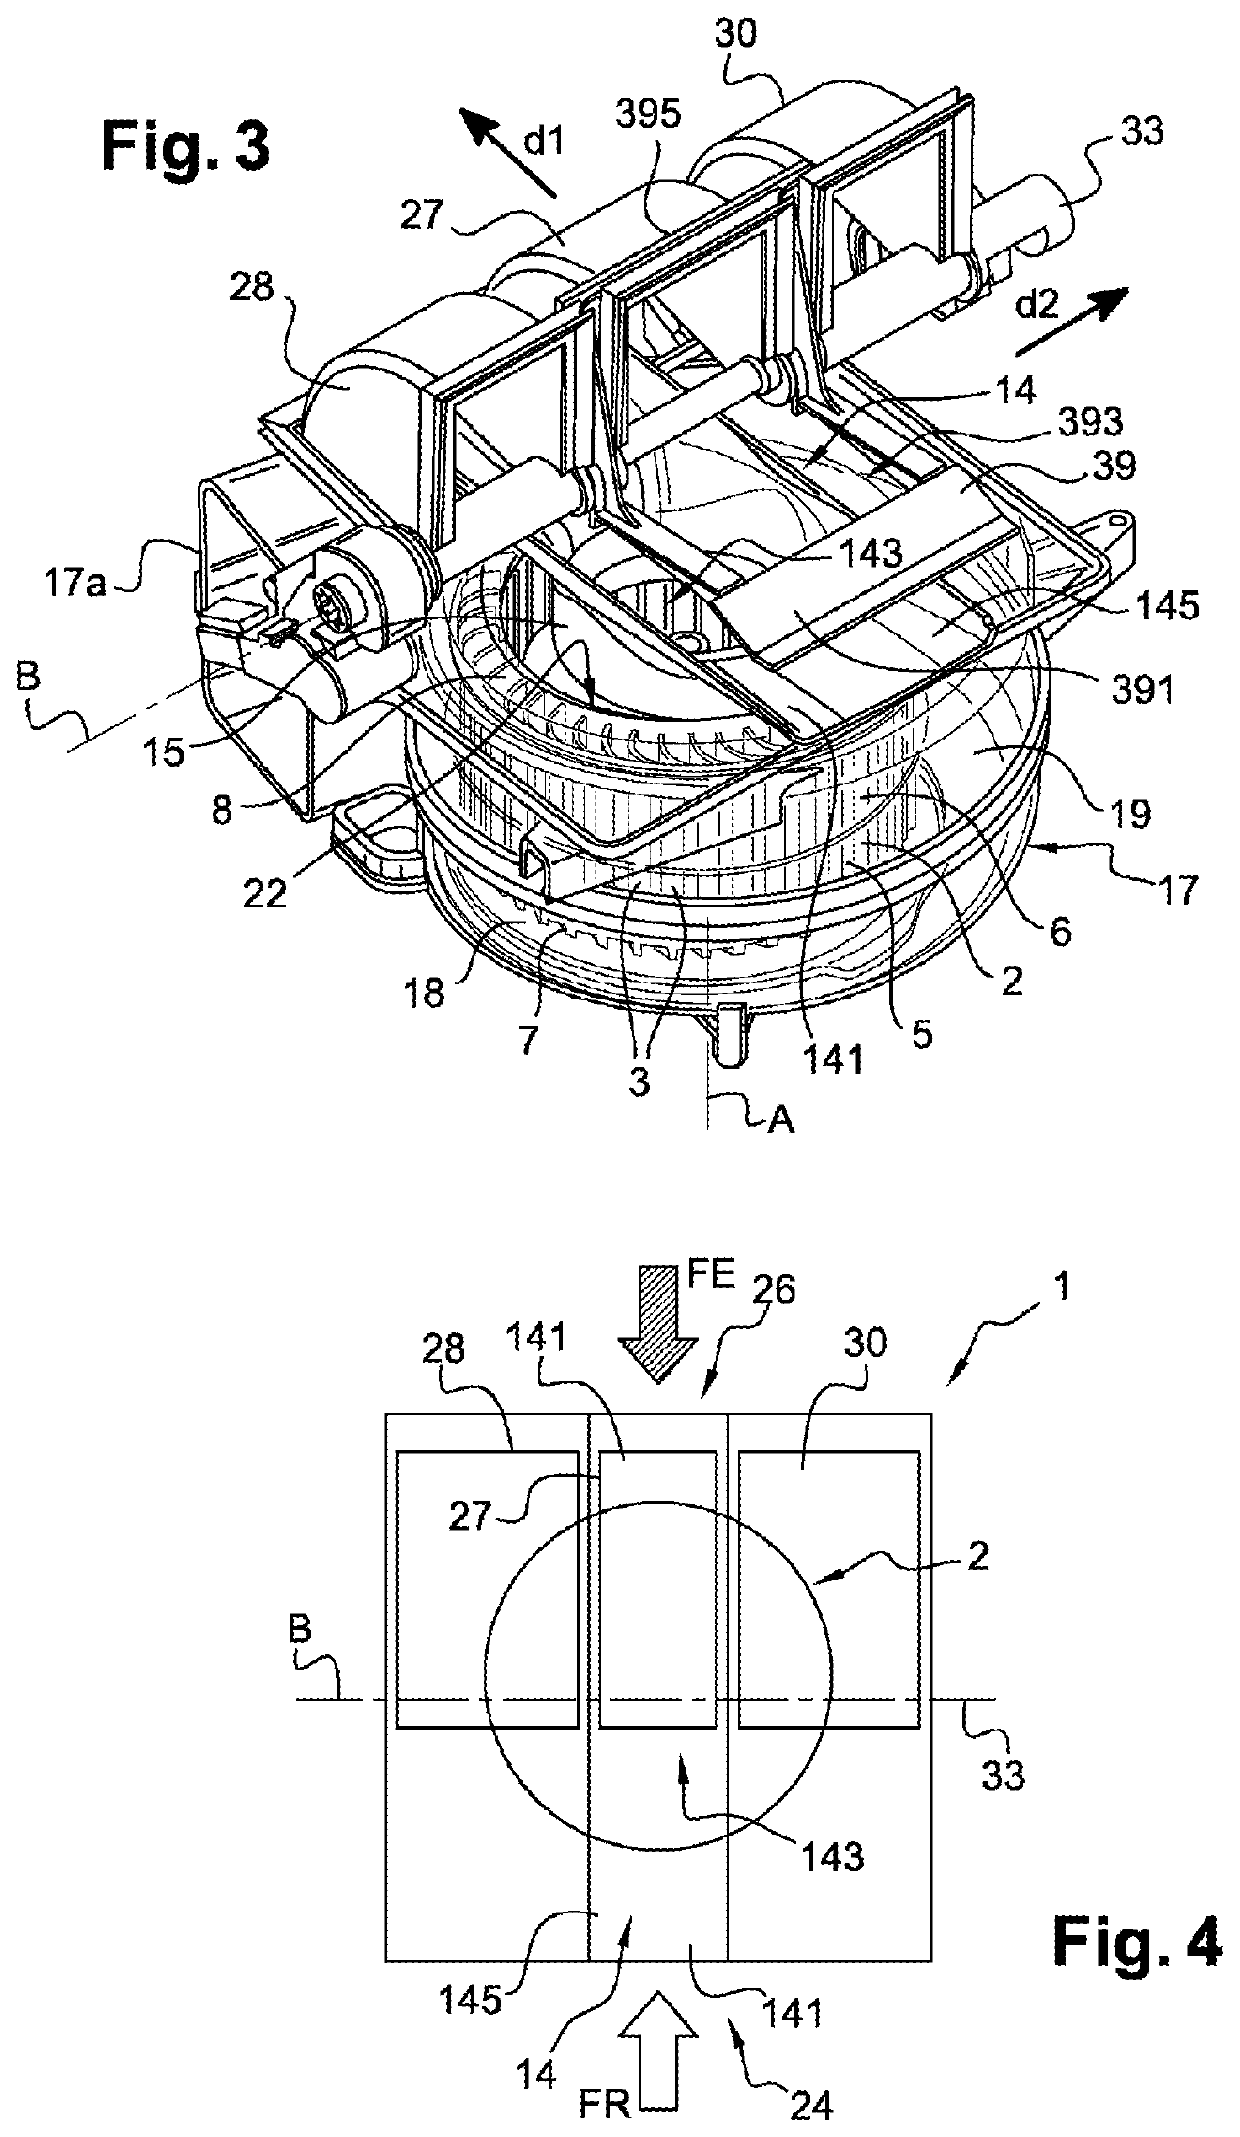 Air intake housing and blower for a corresponding motor vehicle heating, ventilation and/or air conditioning device